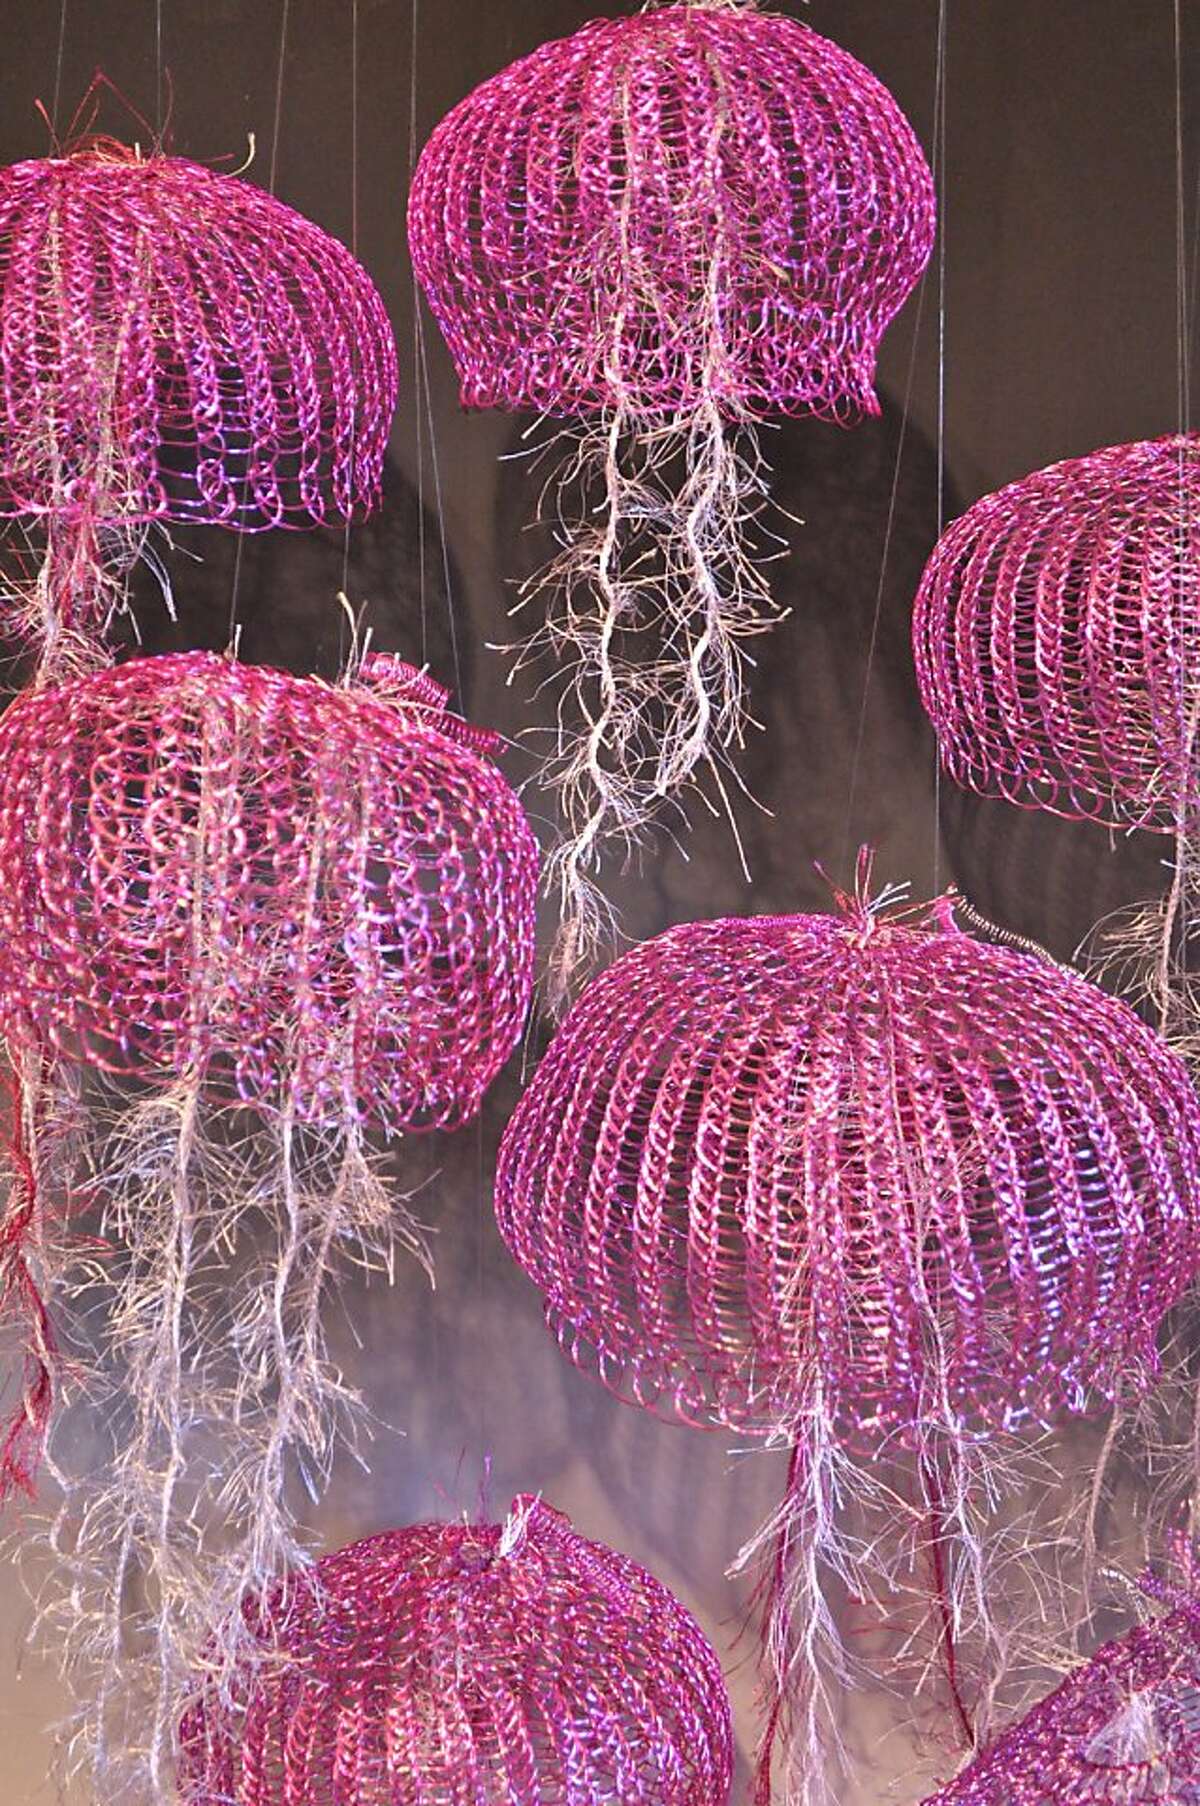 Arline Fisch, Pink Sea Nettles, 2012, Color-coated copper wire and fiber